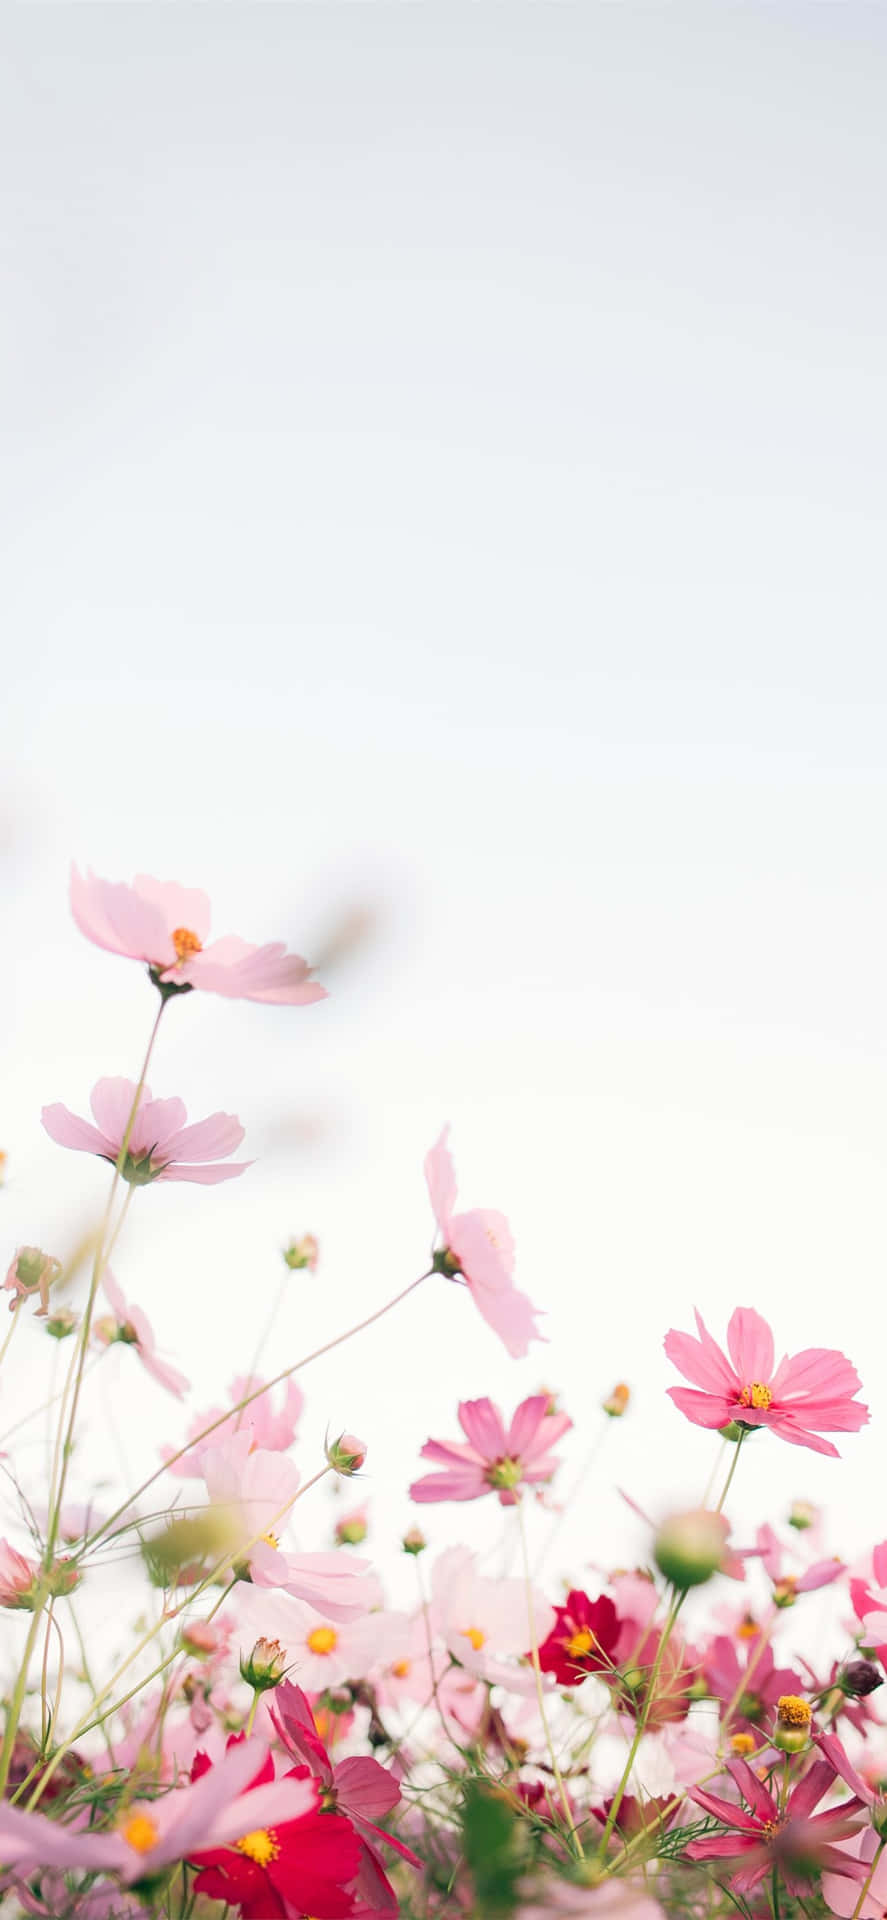 Pink Flowers In The Air With A Blue Sky Wallpaper